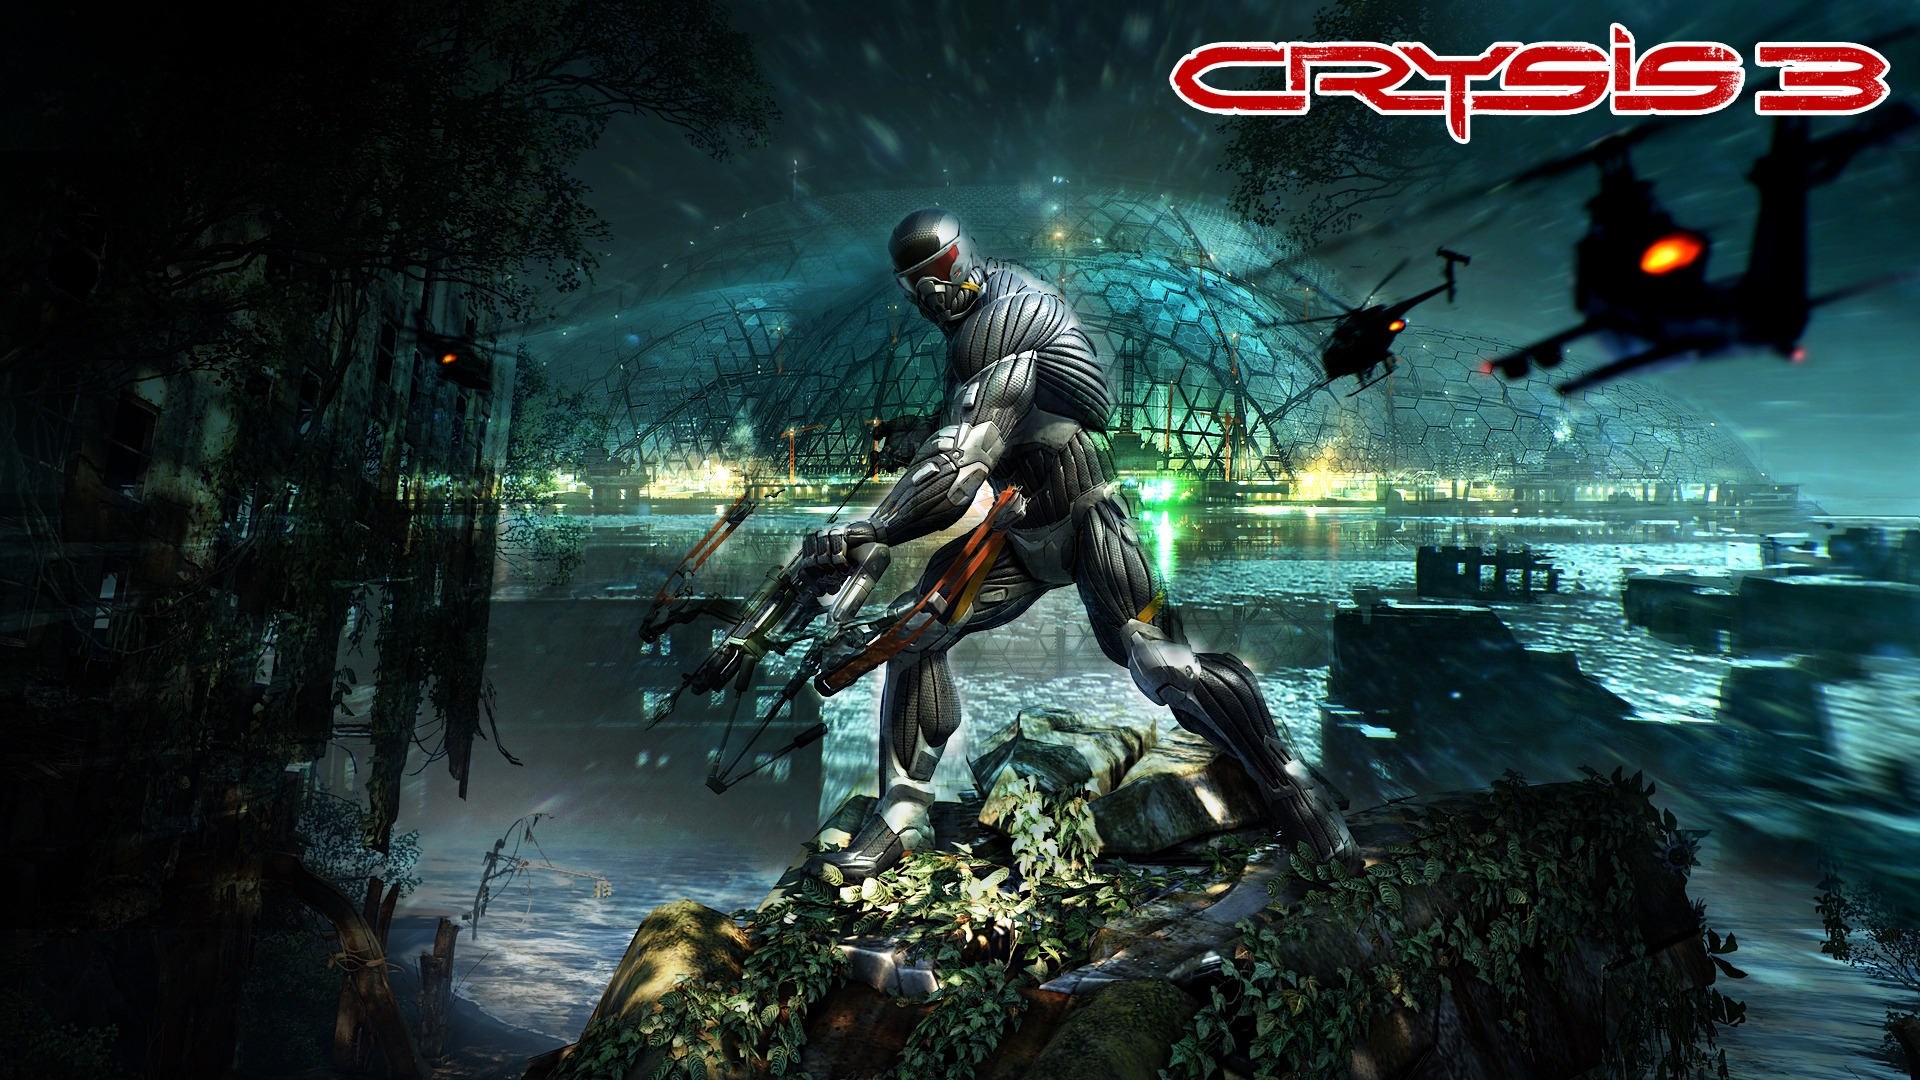 Crysis 3 Poster for 1920 x 1080 HDTV 1080p resolution